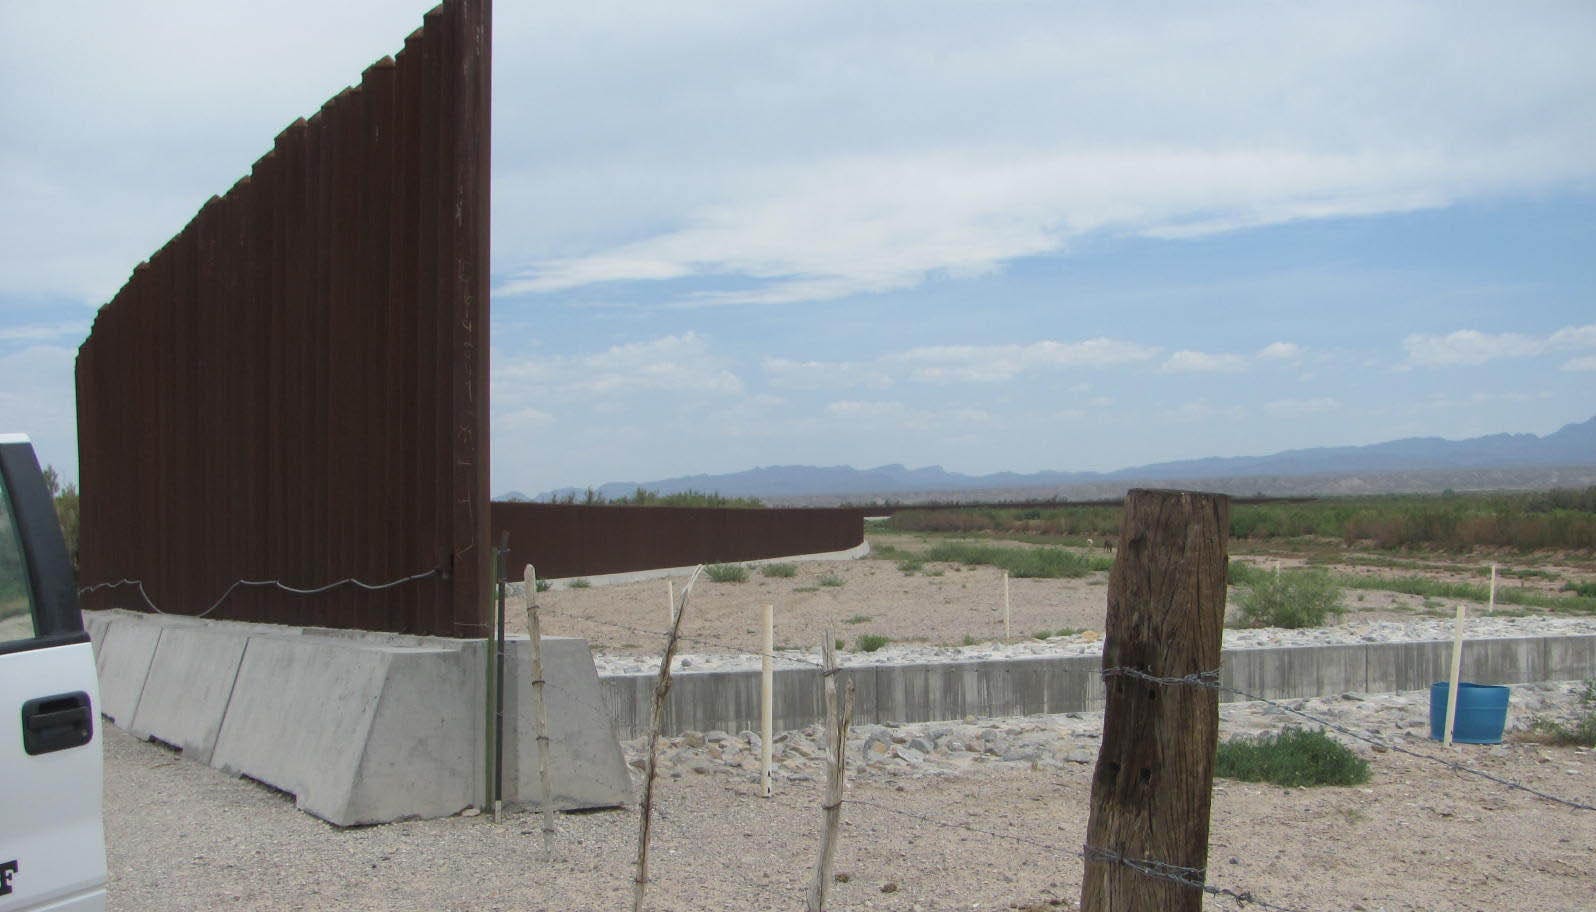 Fort Hancock, Texas: Where a fence and hope for illegals ends | Fox News